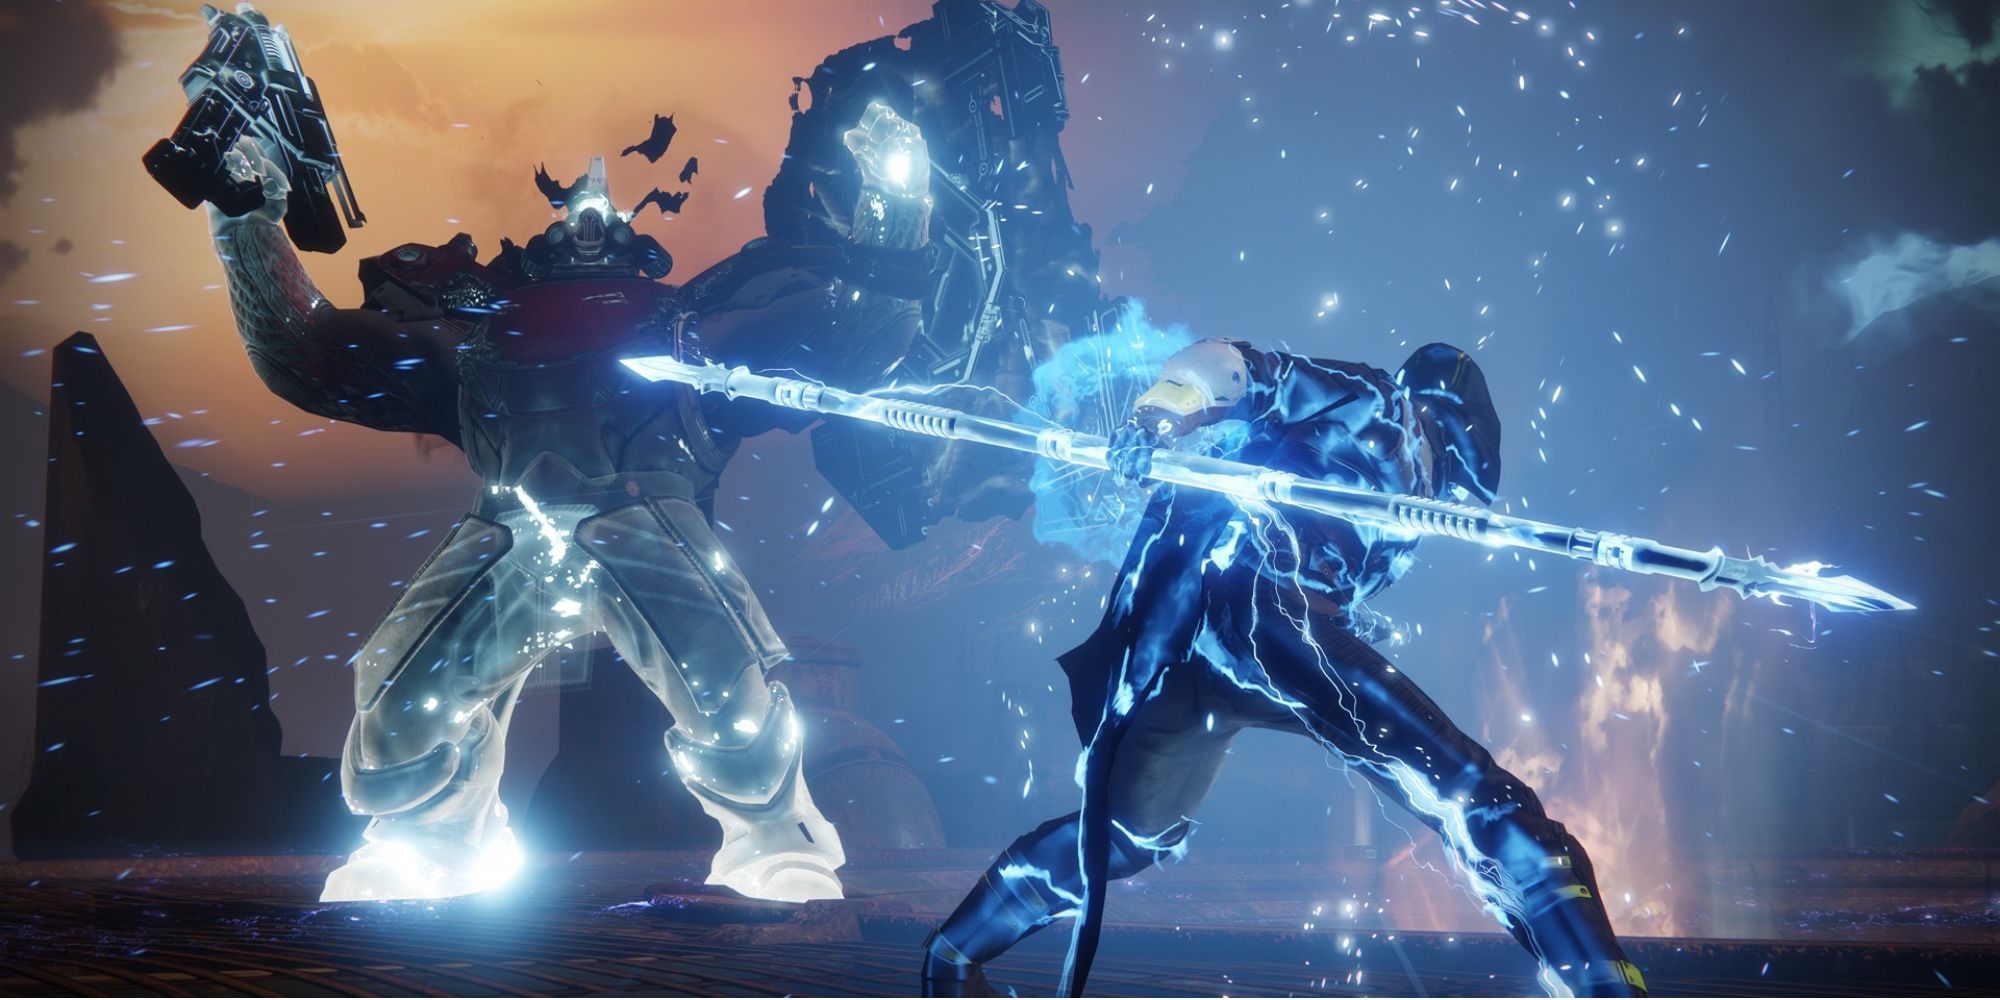 Great PvE Games - Destiny 2 - Player fights enemies with melee weapons